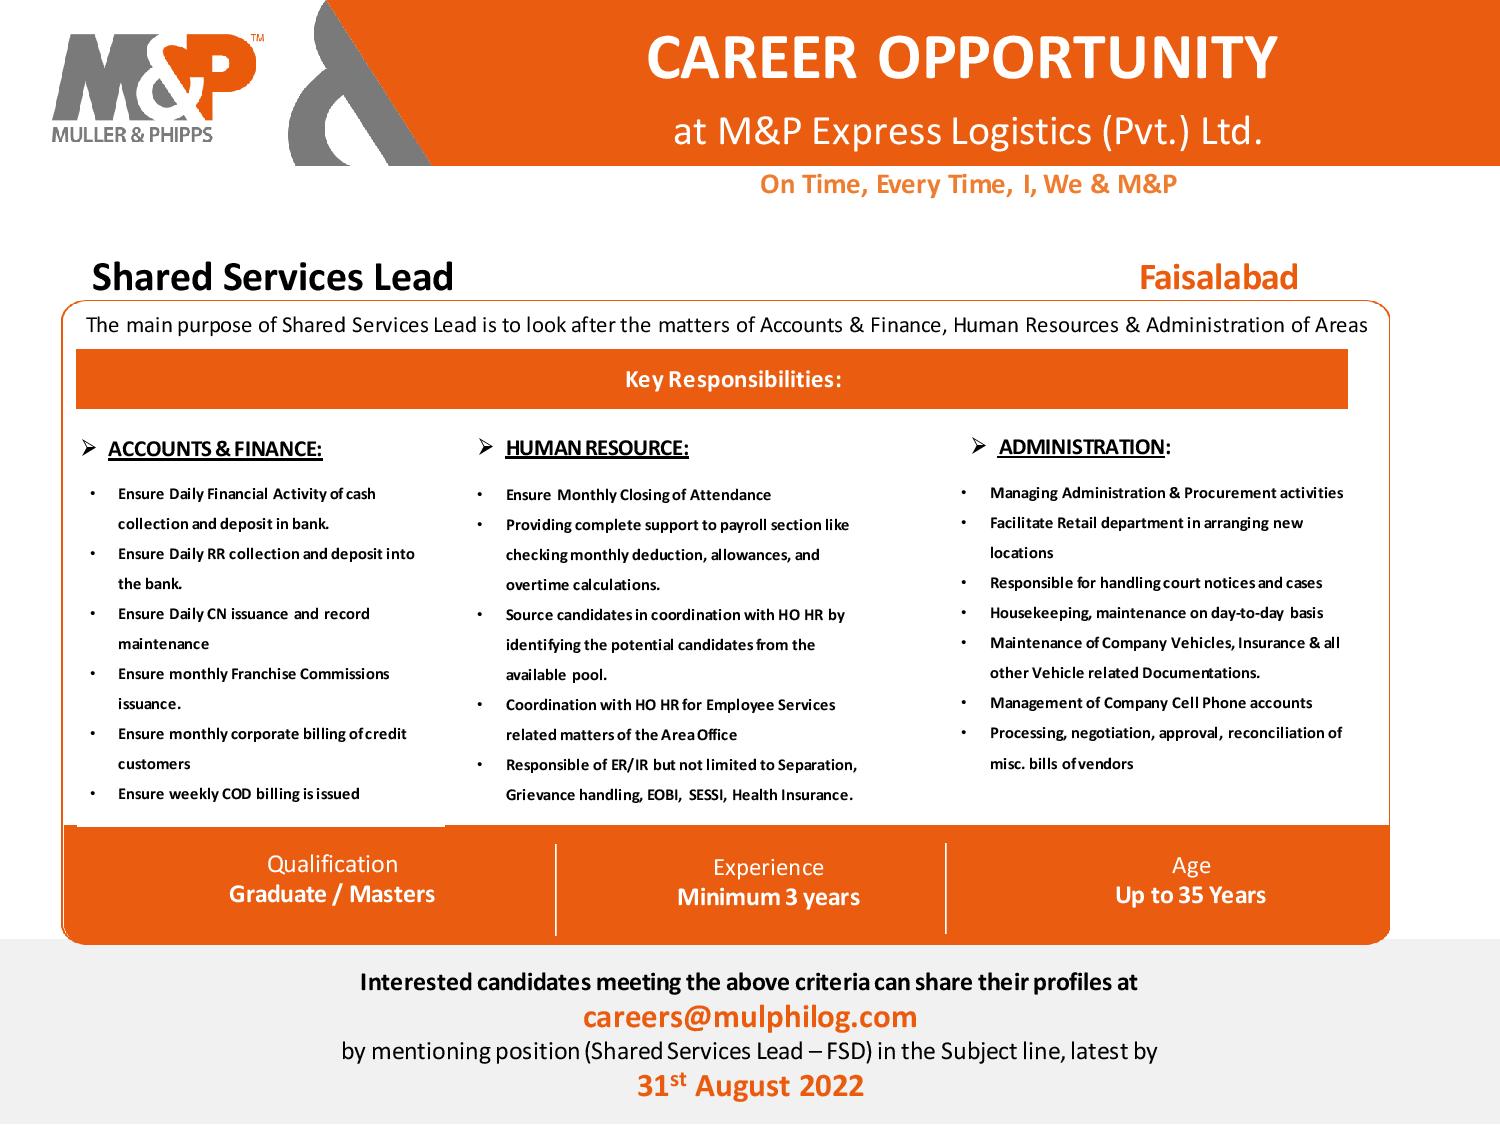 Shared Services Lead opportunity at M&P Express Logistics